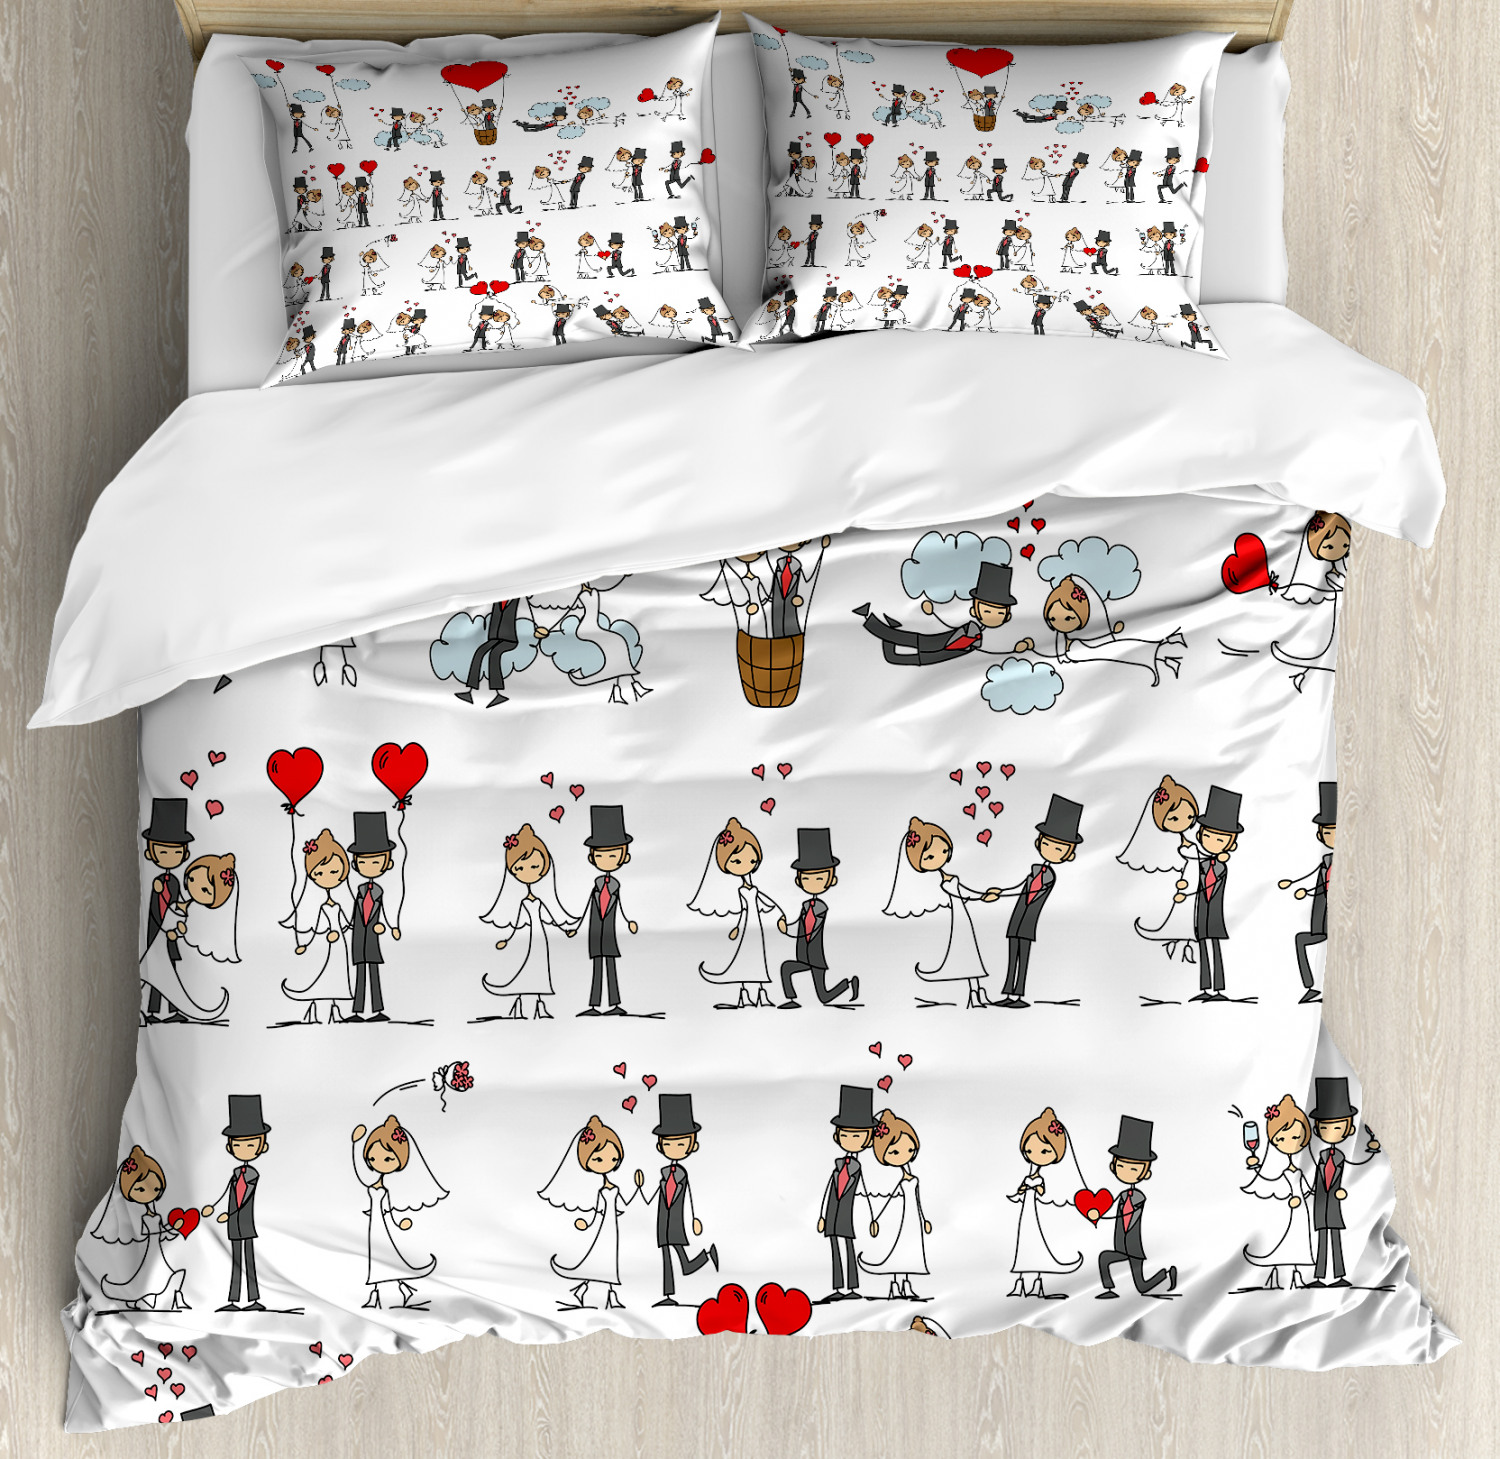 Details About Cartoon Duvet Cover Set With Pillow Shams Cute Couple On Clouds Print